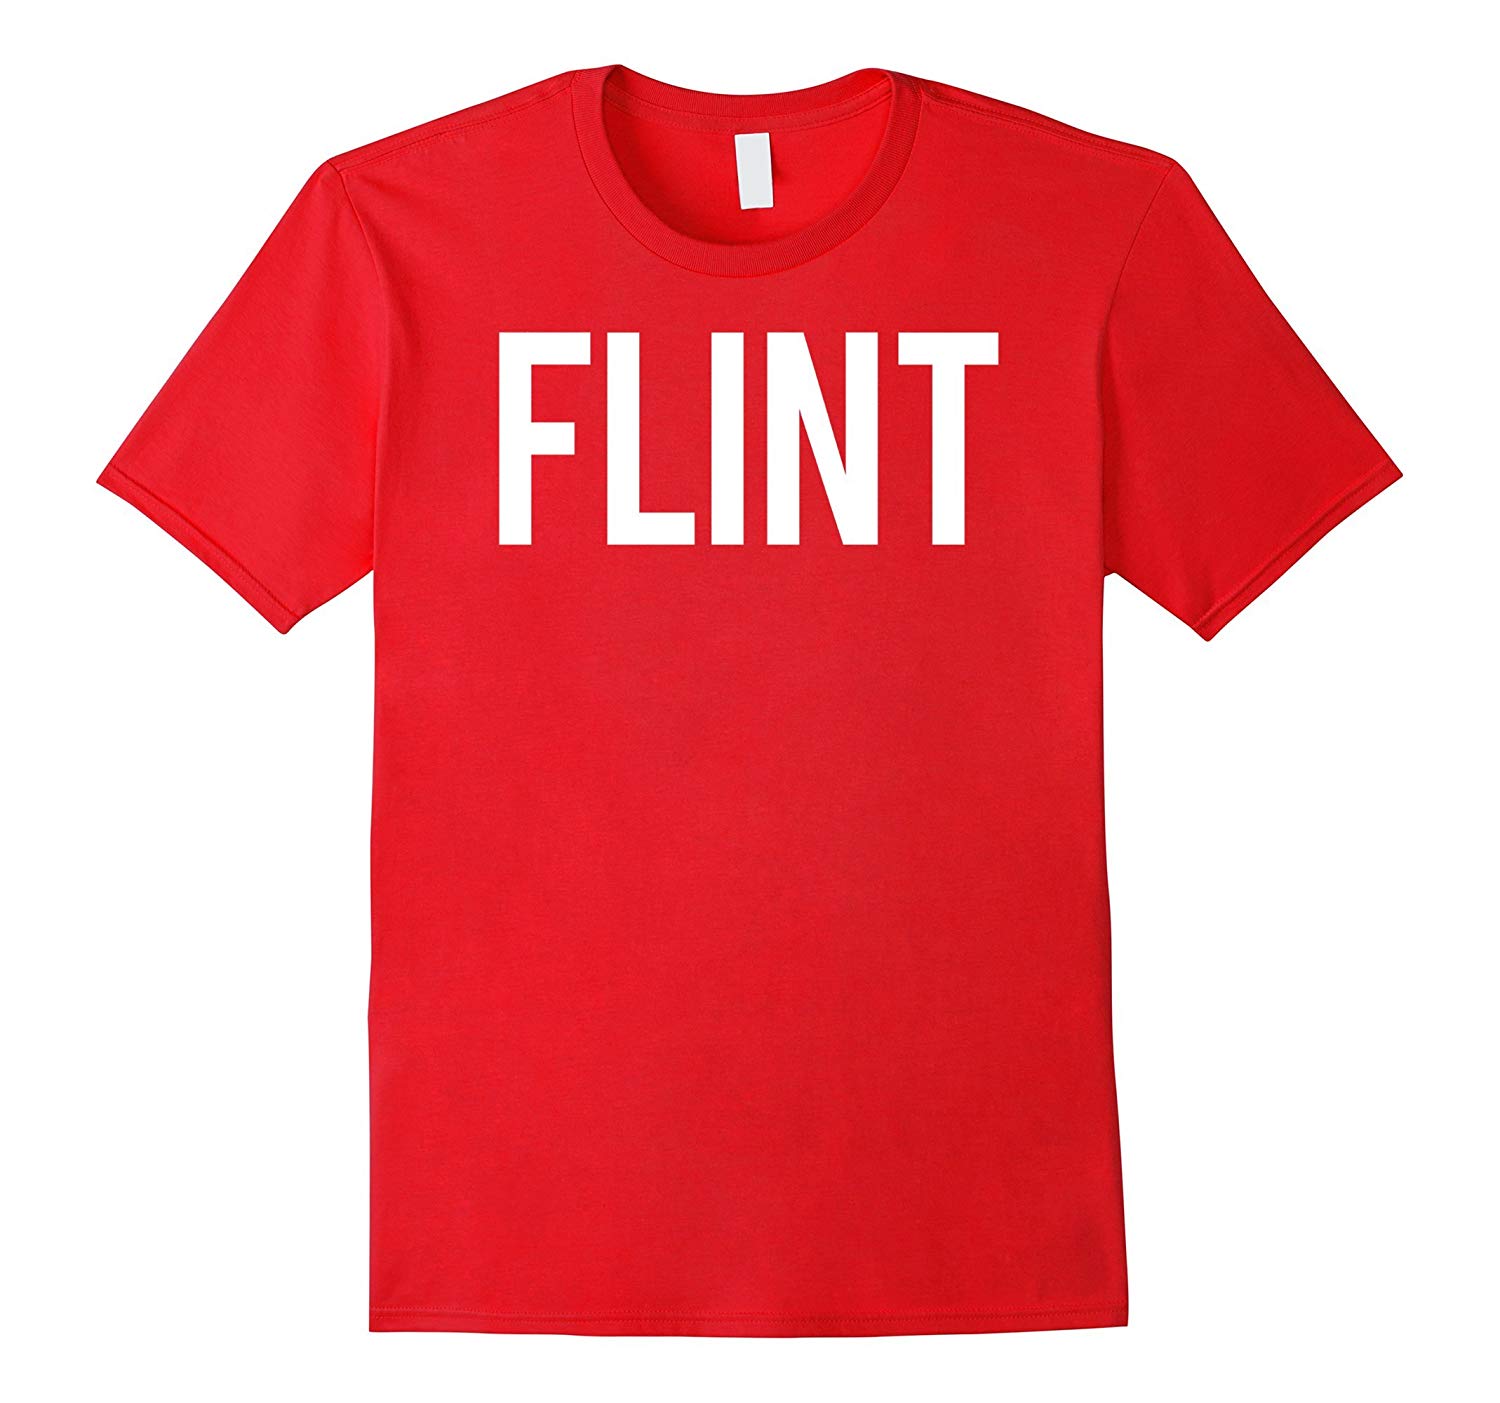 T-shirt with block letters spelling "FLINT"